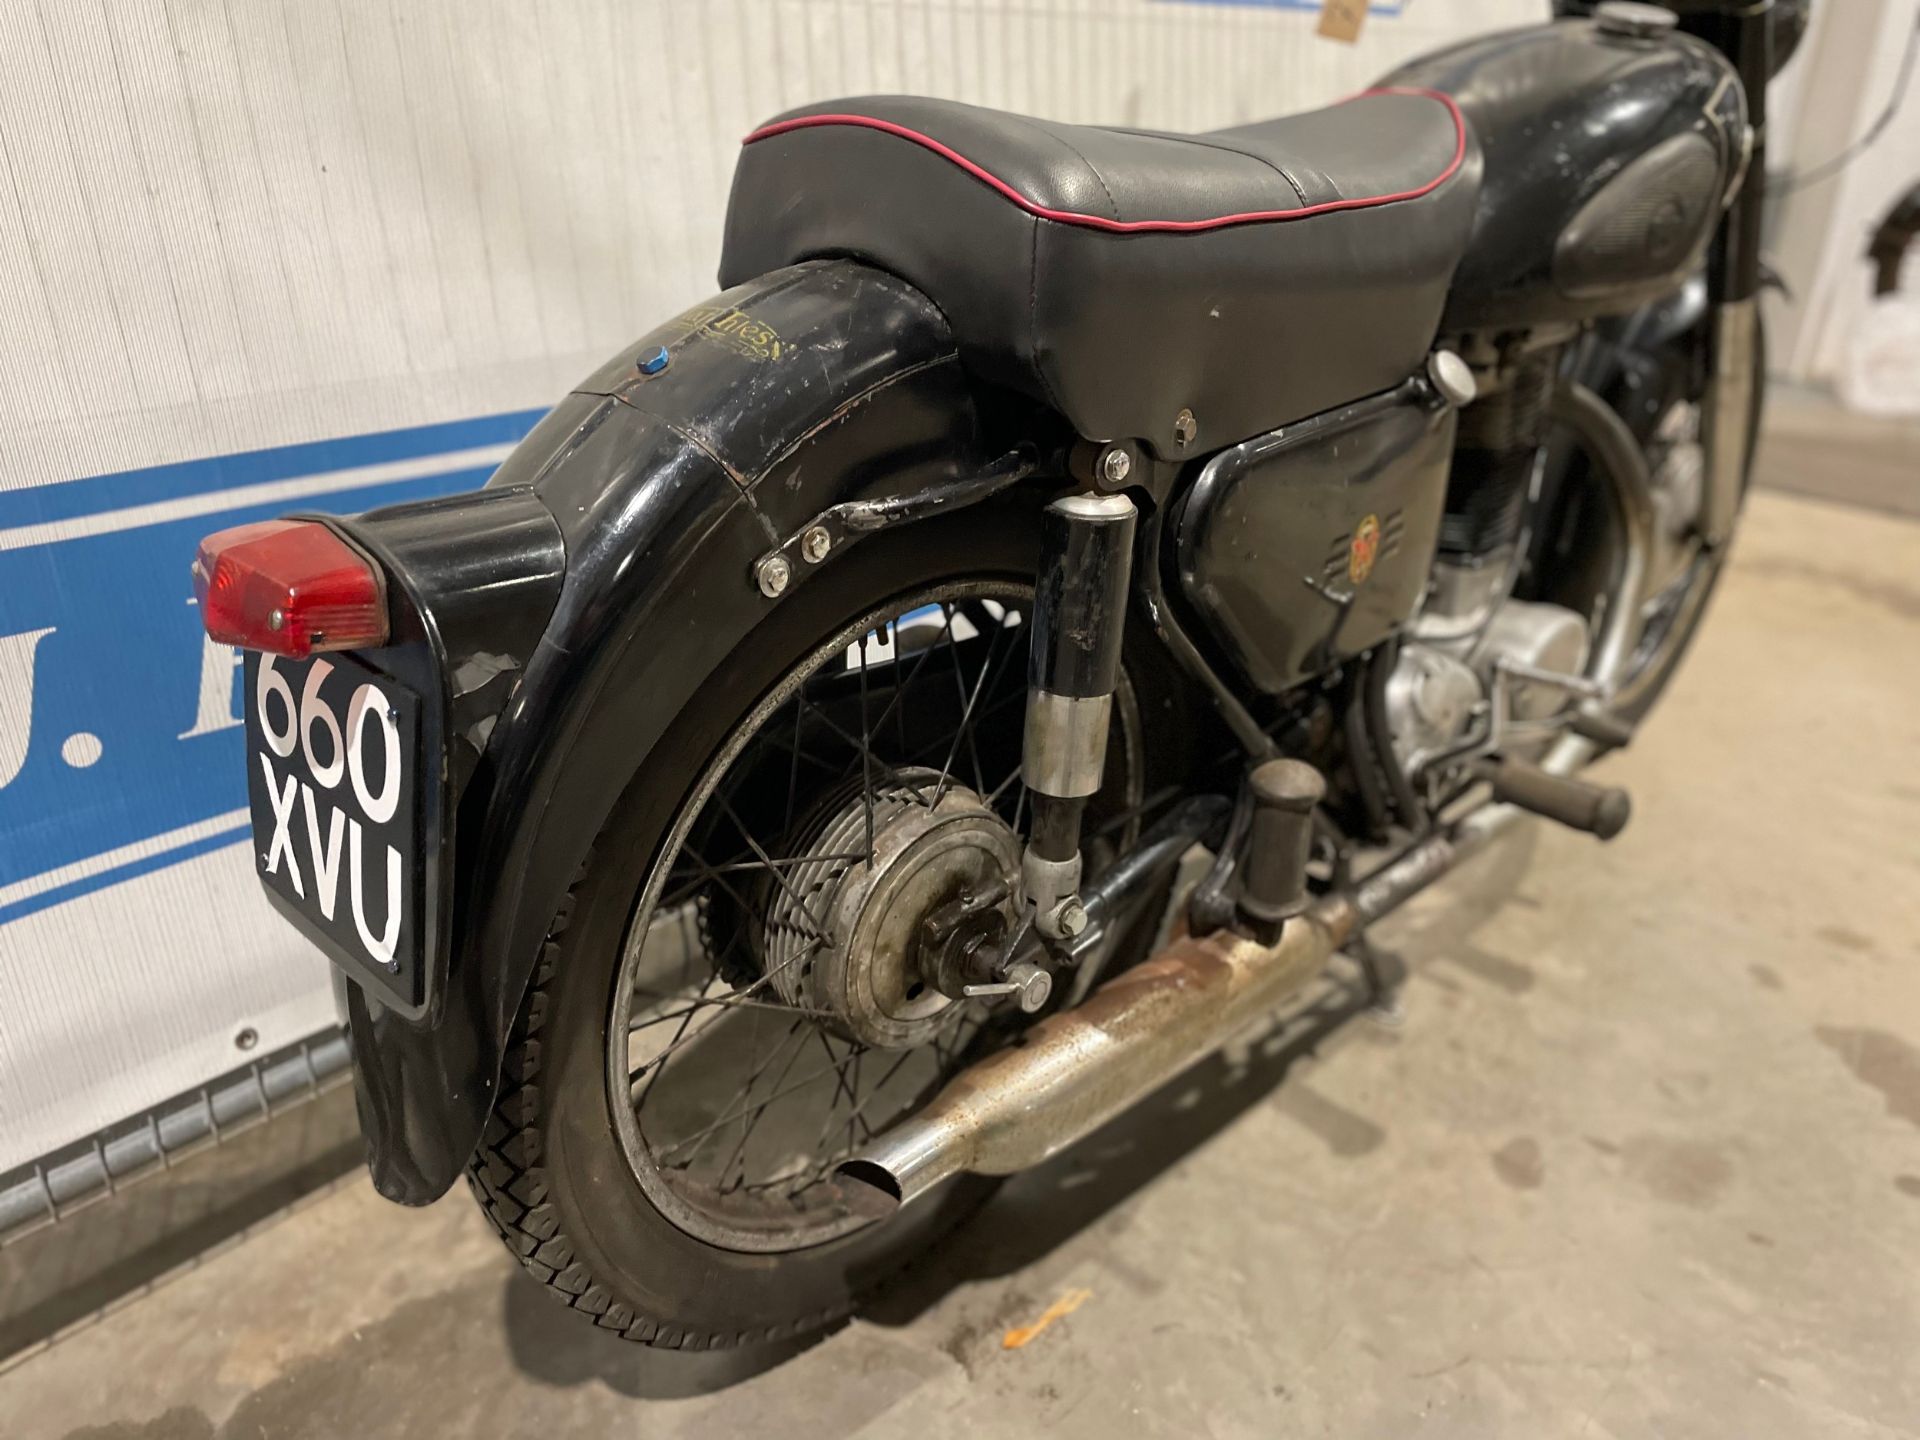 Matchless G3 motorcycle. 1958. 348cc. Has run recently but needs a new clutch. Reg 660 XVU. V5 - Image 5 of 12